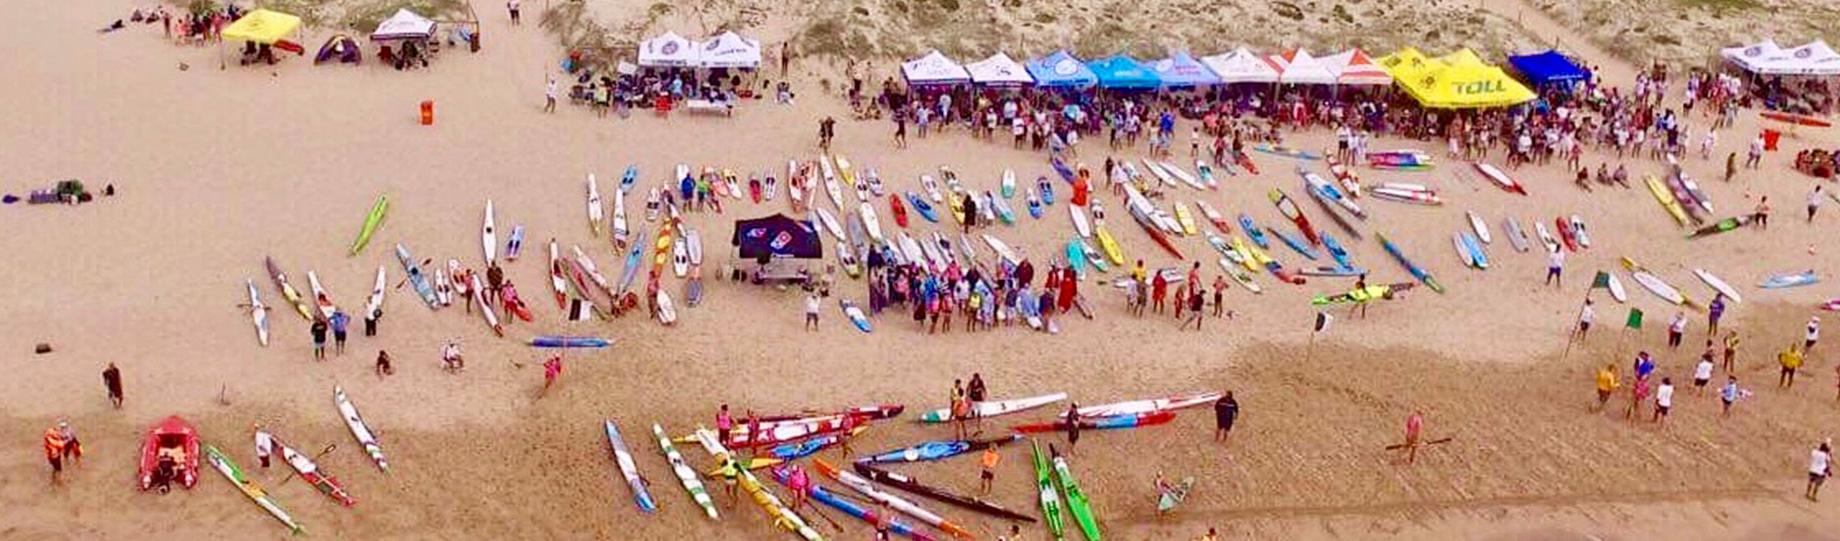 Aerial image of competition at Wanda SLSC